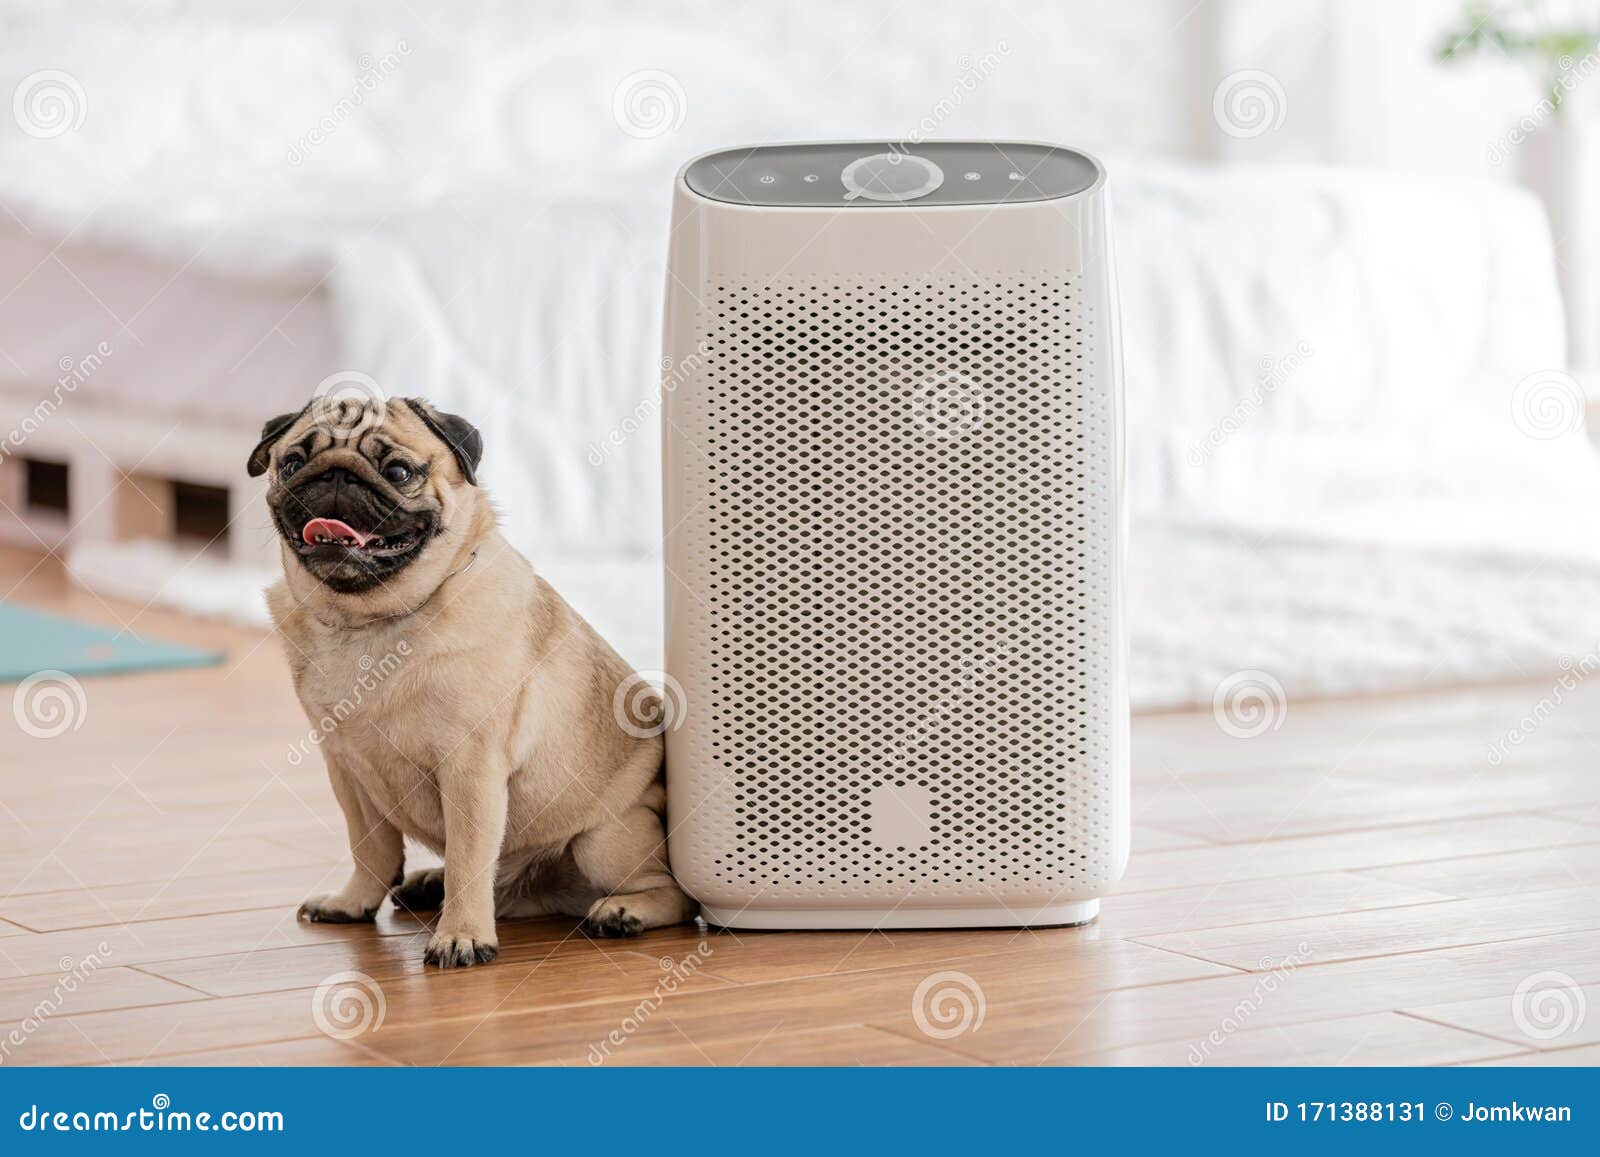 Dog Pug Breed And Air Purifier In Cozy White Bed Room For